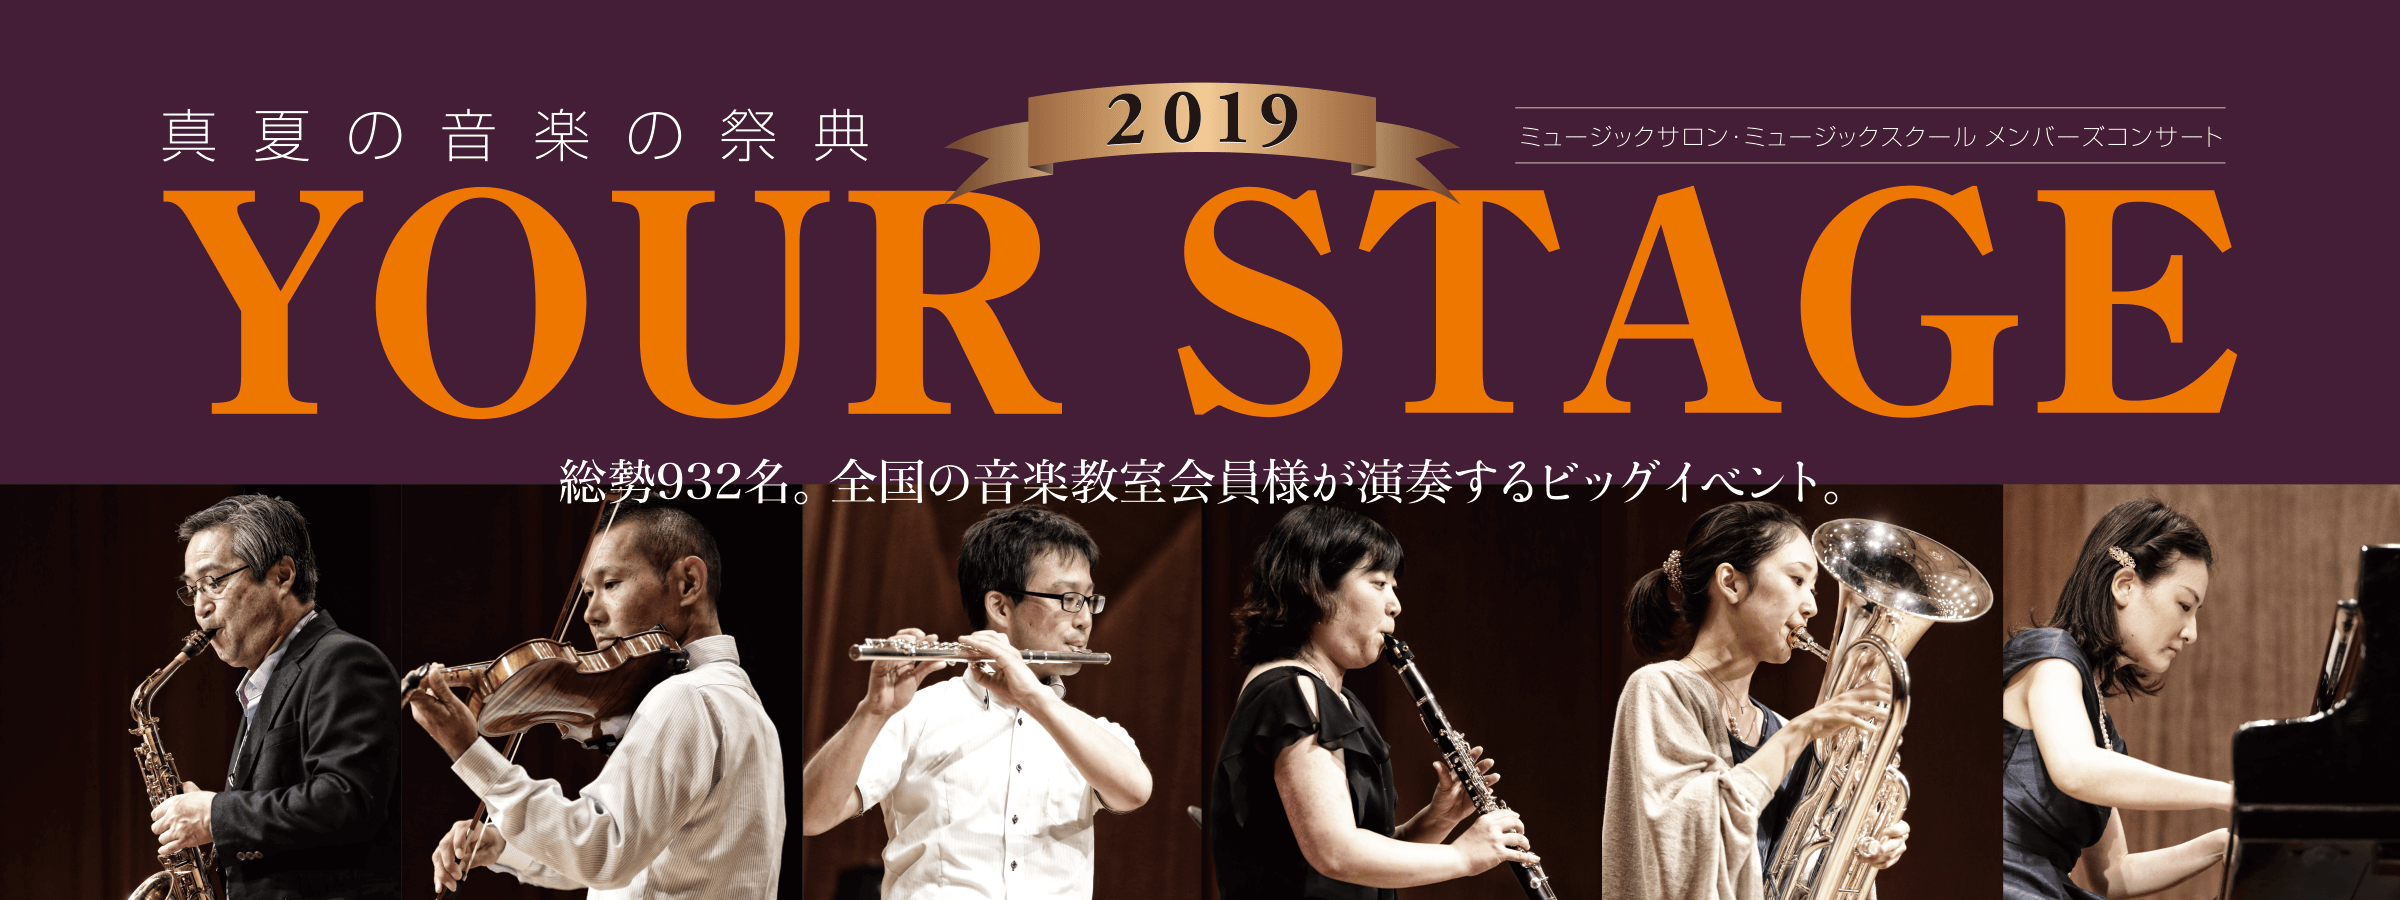 YOUR STAGE 2019レポート！